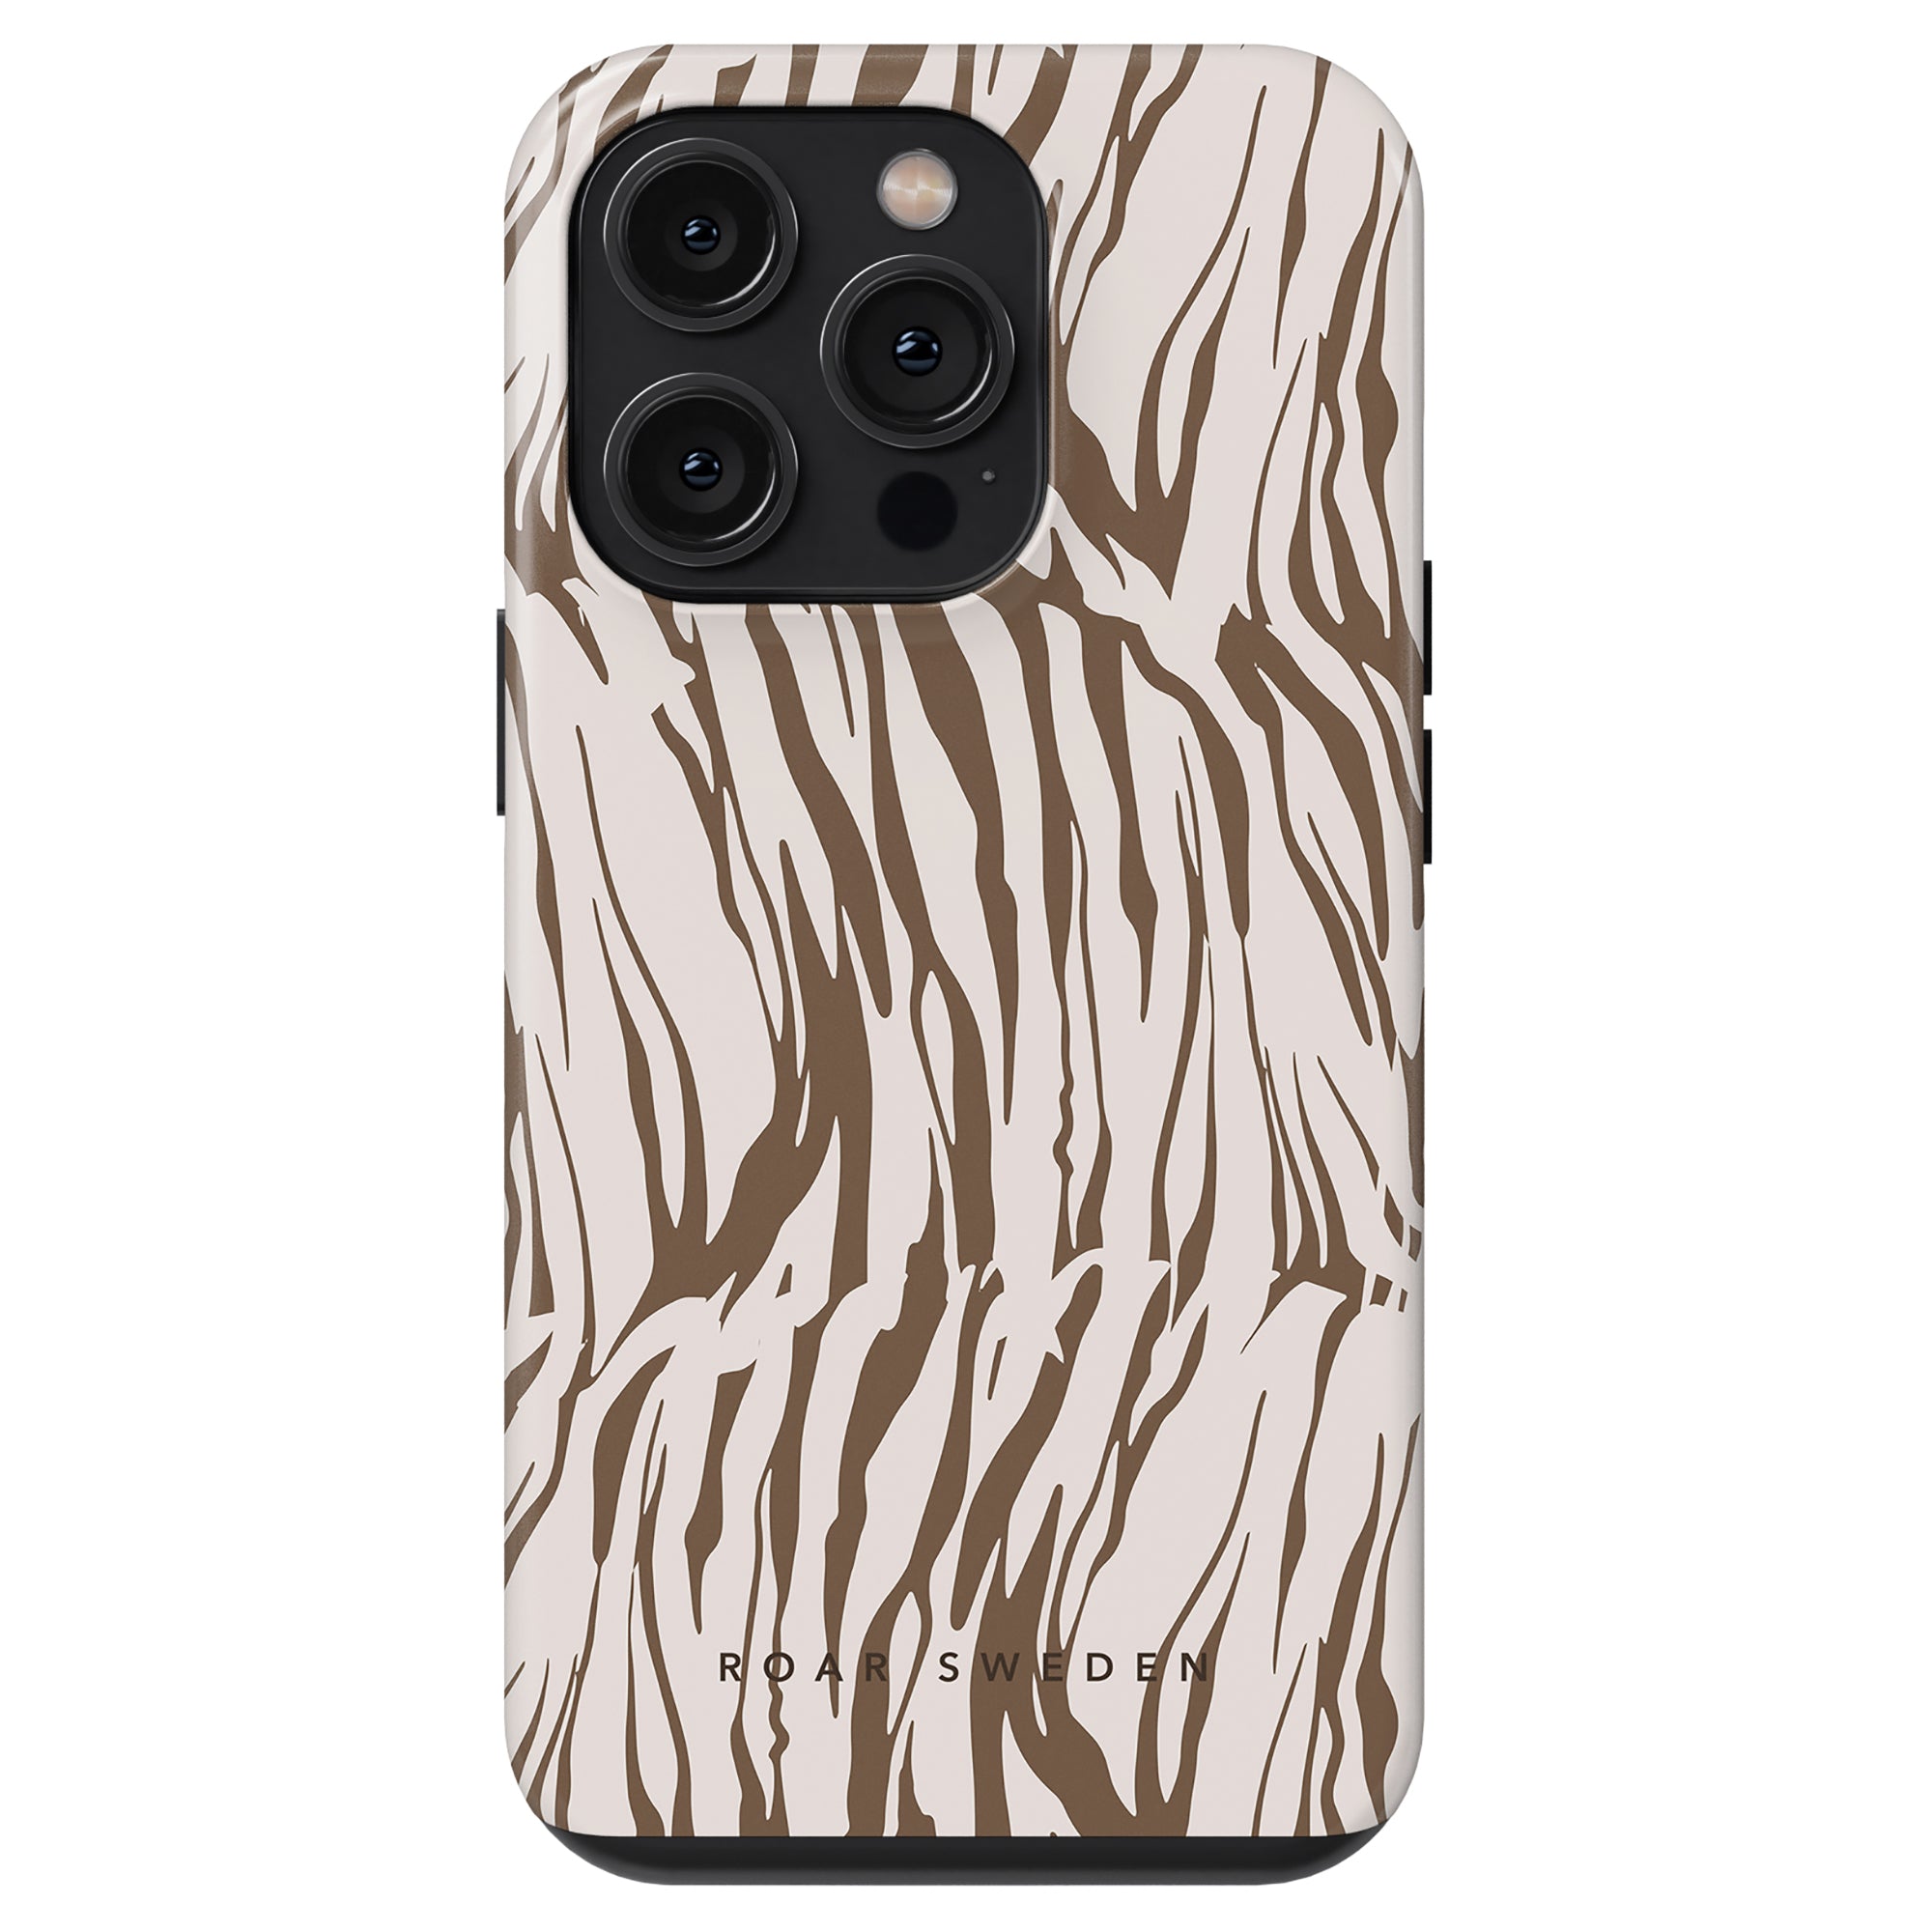 A smartphone with a White Tiger - Tough Case featuring a triple camera setup.